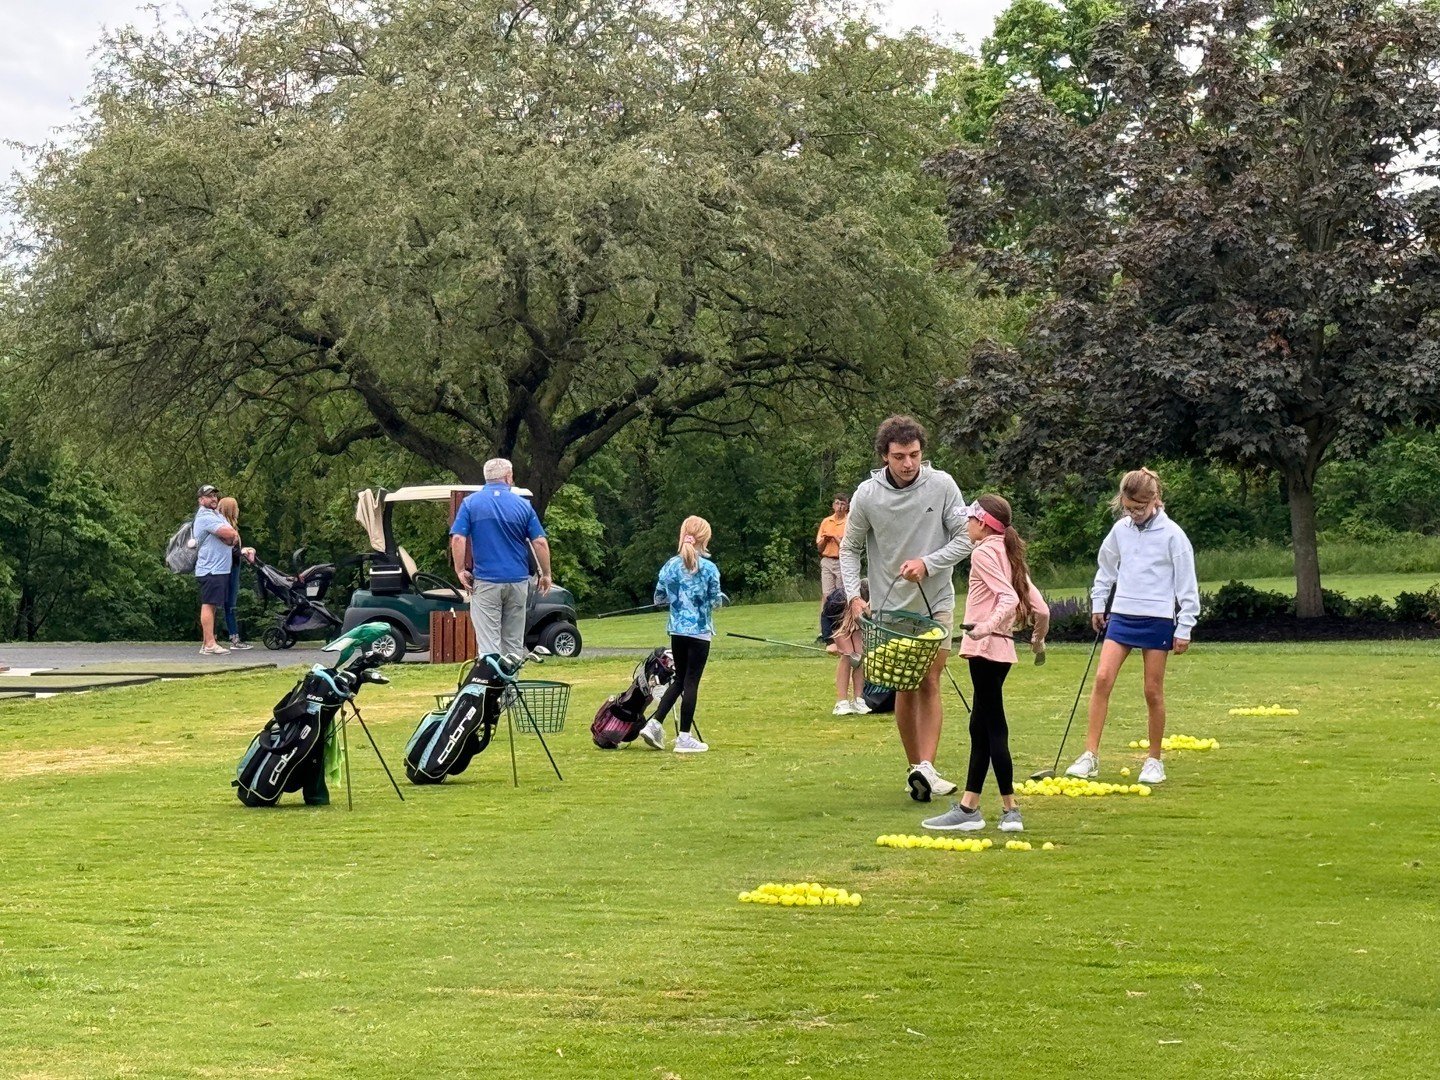 Intraclub 2 had a great start yesterday and we, thankfully, barely escaped the rain! We had a great turnout!

If you missed 1 &amp; 2, please know that it's not too late to register your junior golfer for Session 3!

Schedule &amp; Registration info,